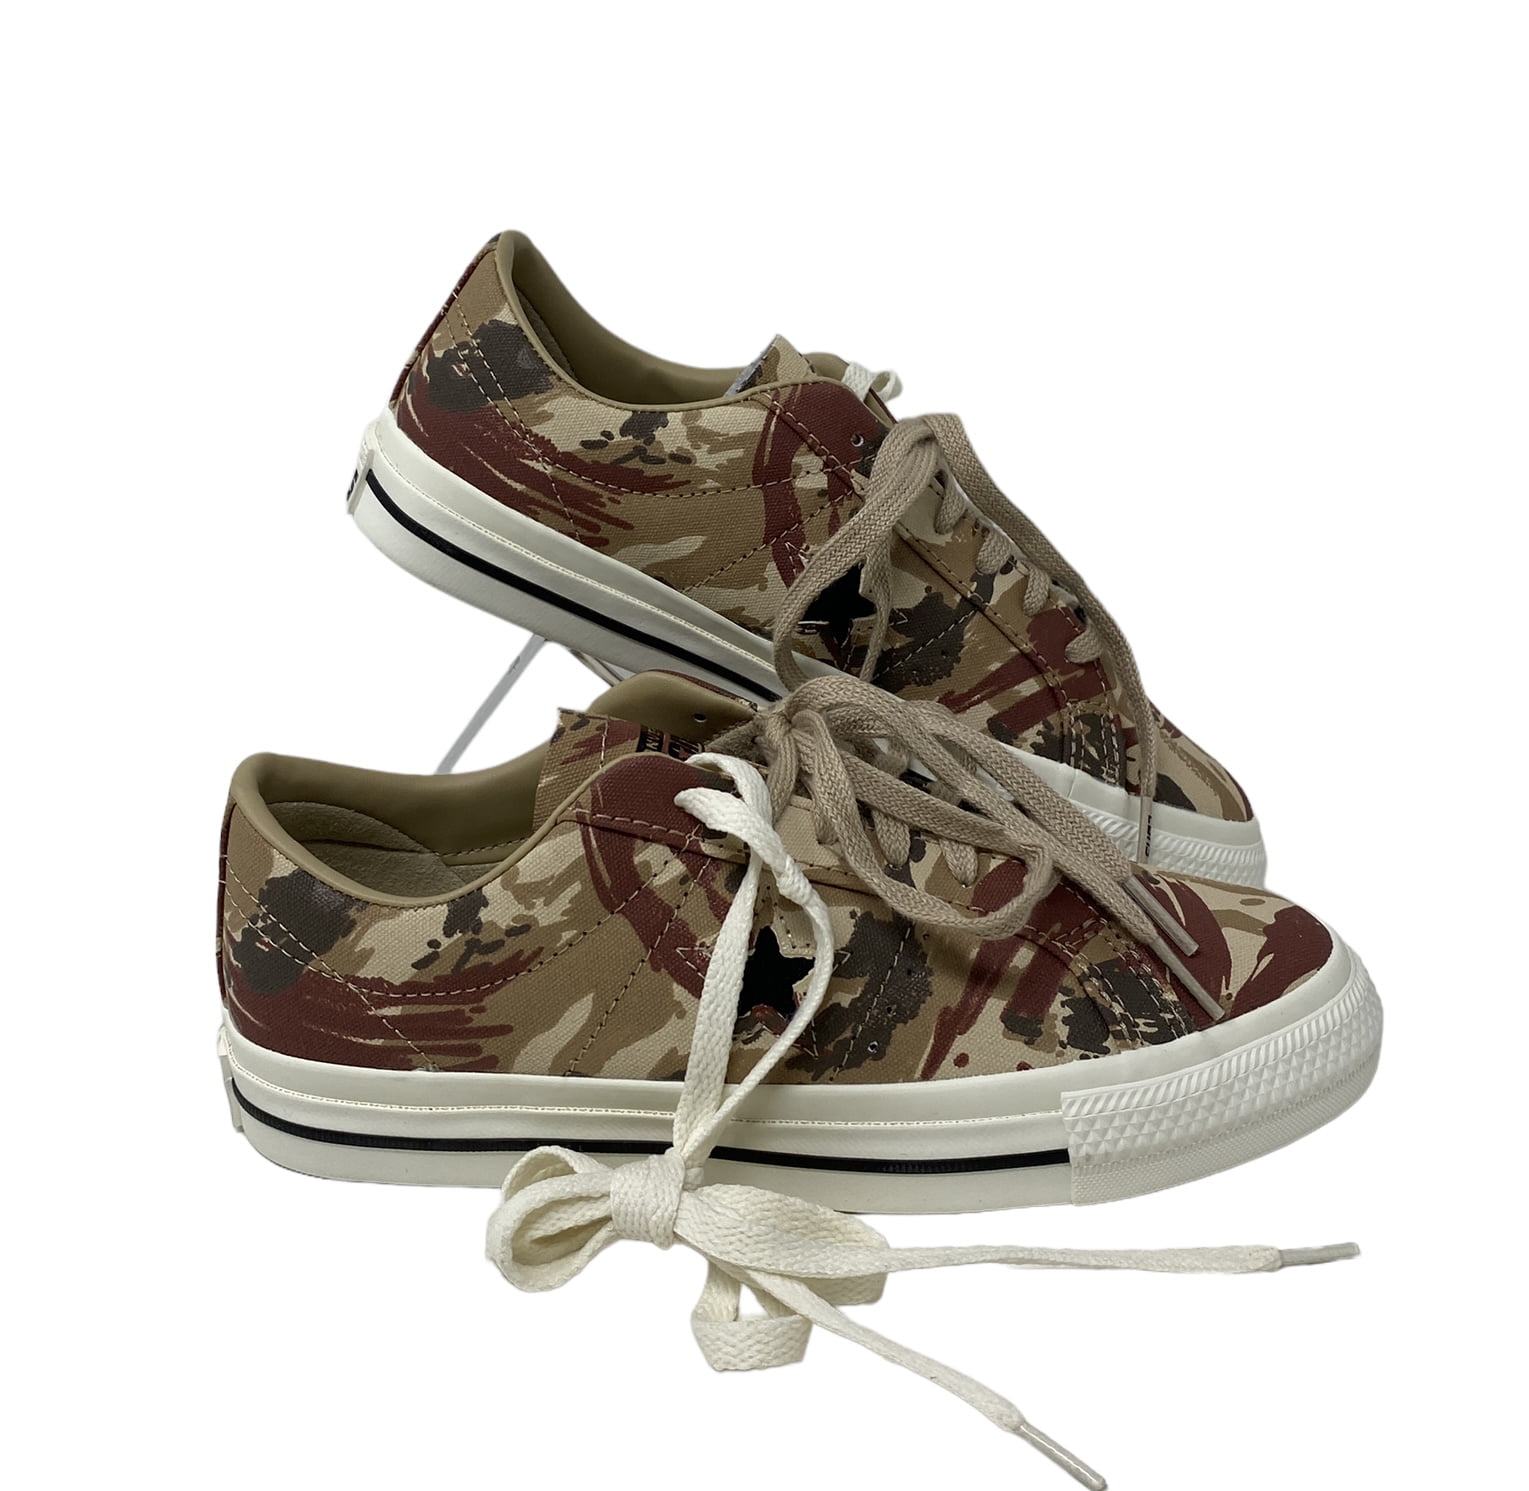 Converse New Reflective Camouflage and Star Print Chuck II Sneakers